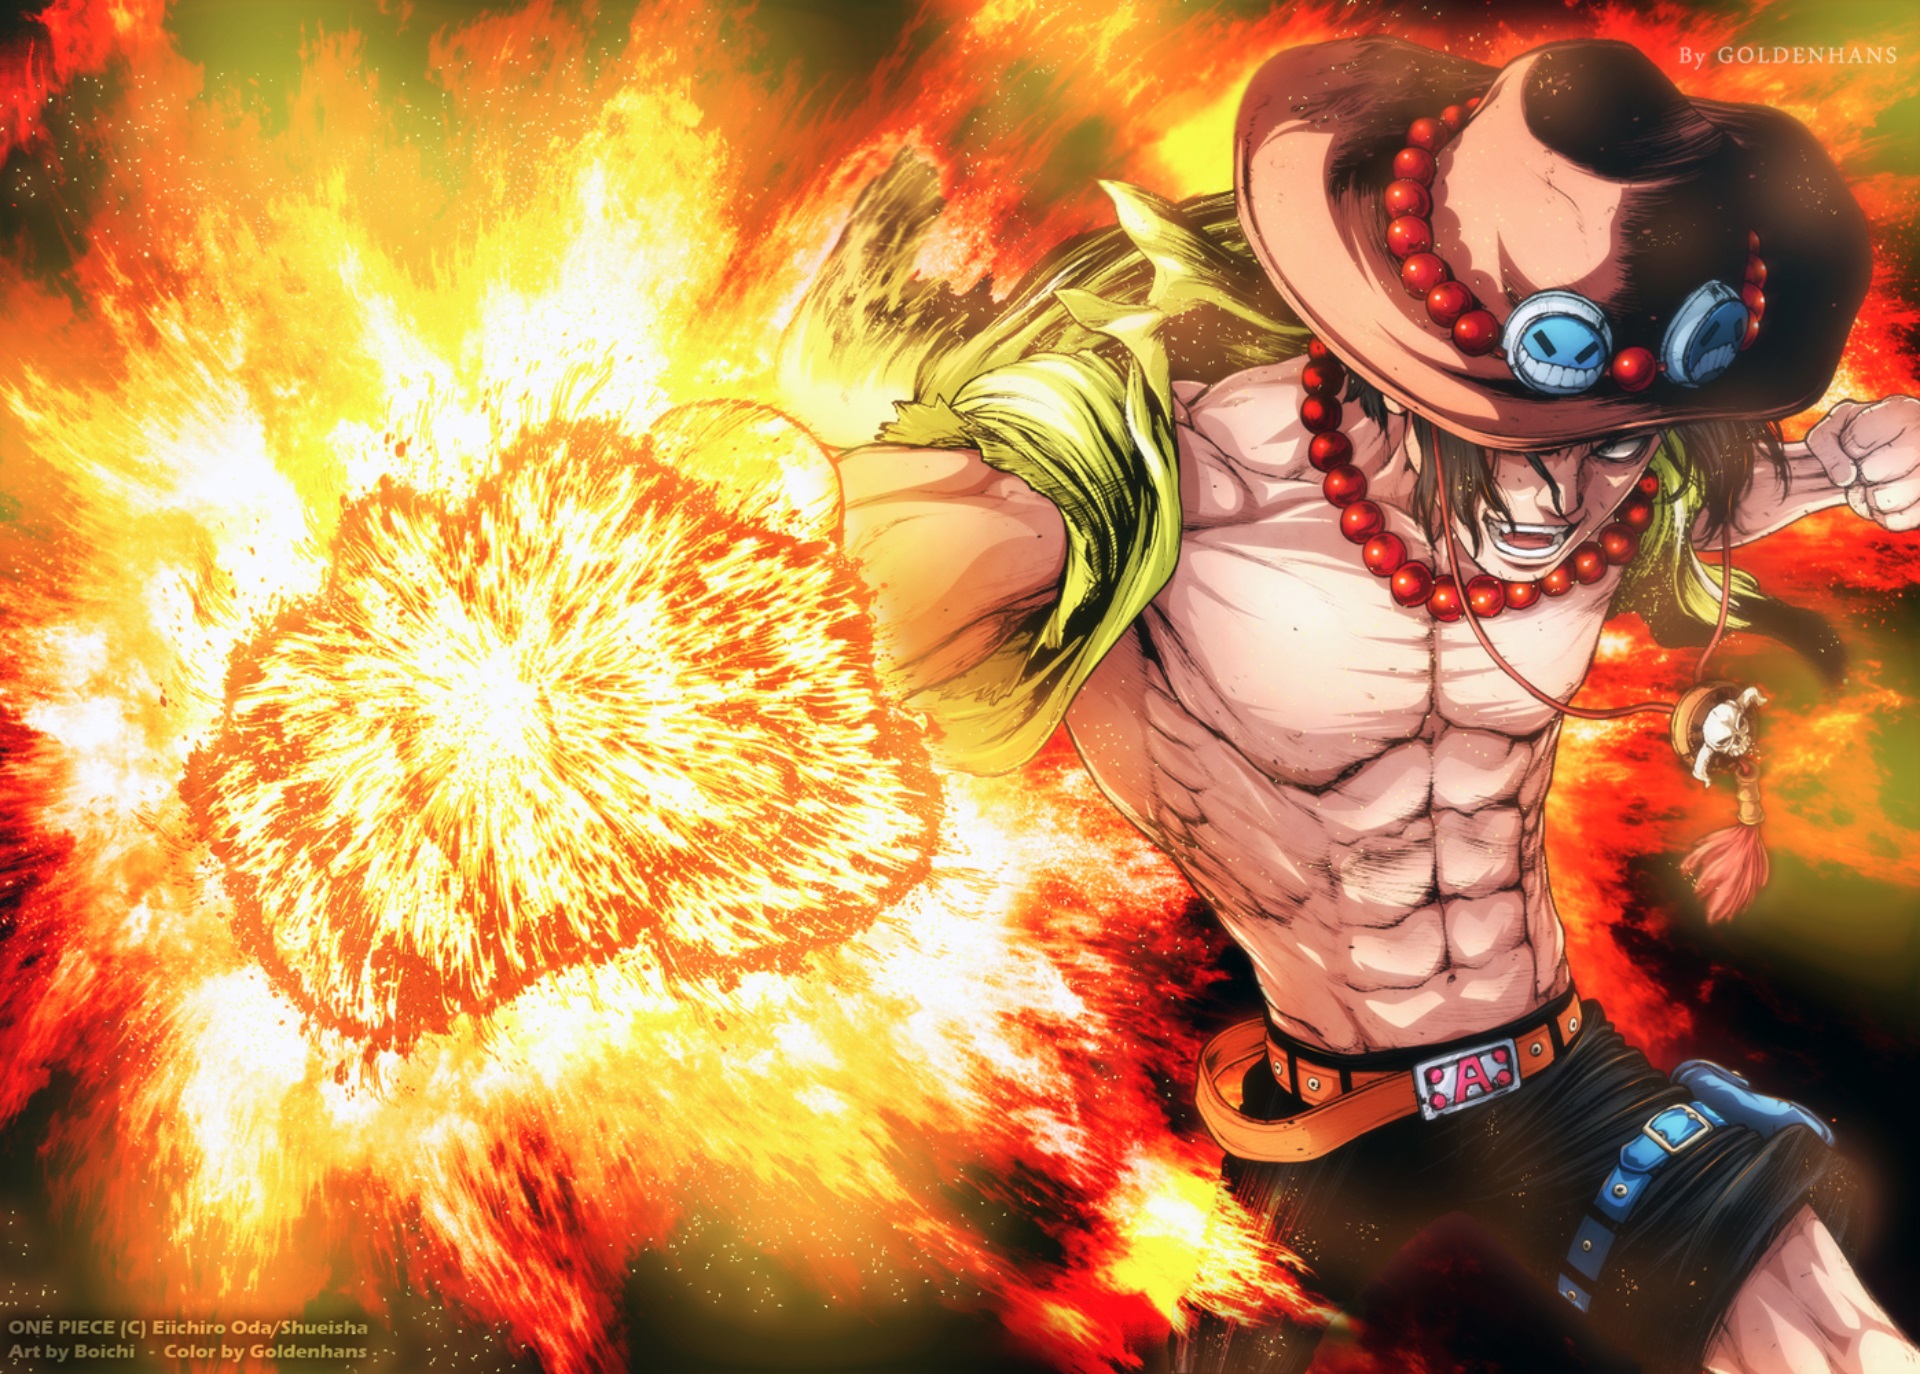 Download Portgas D Ace Anime One Piece Hd Wallpaper By Goldenhans 8363